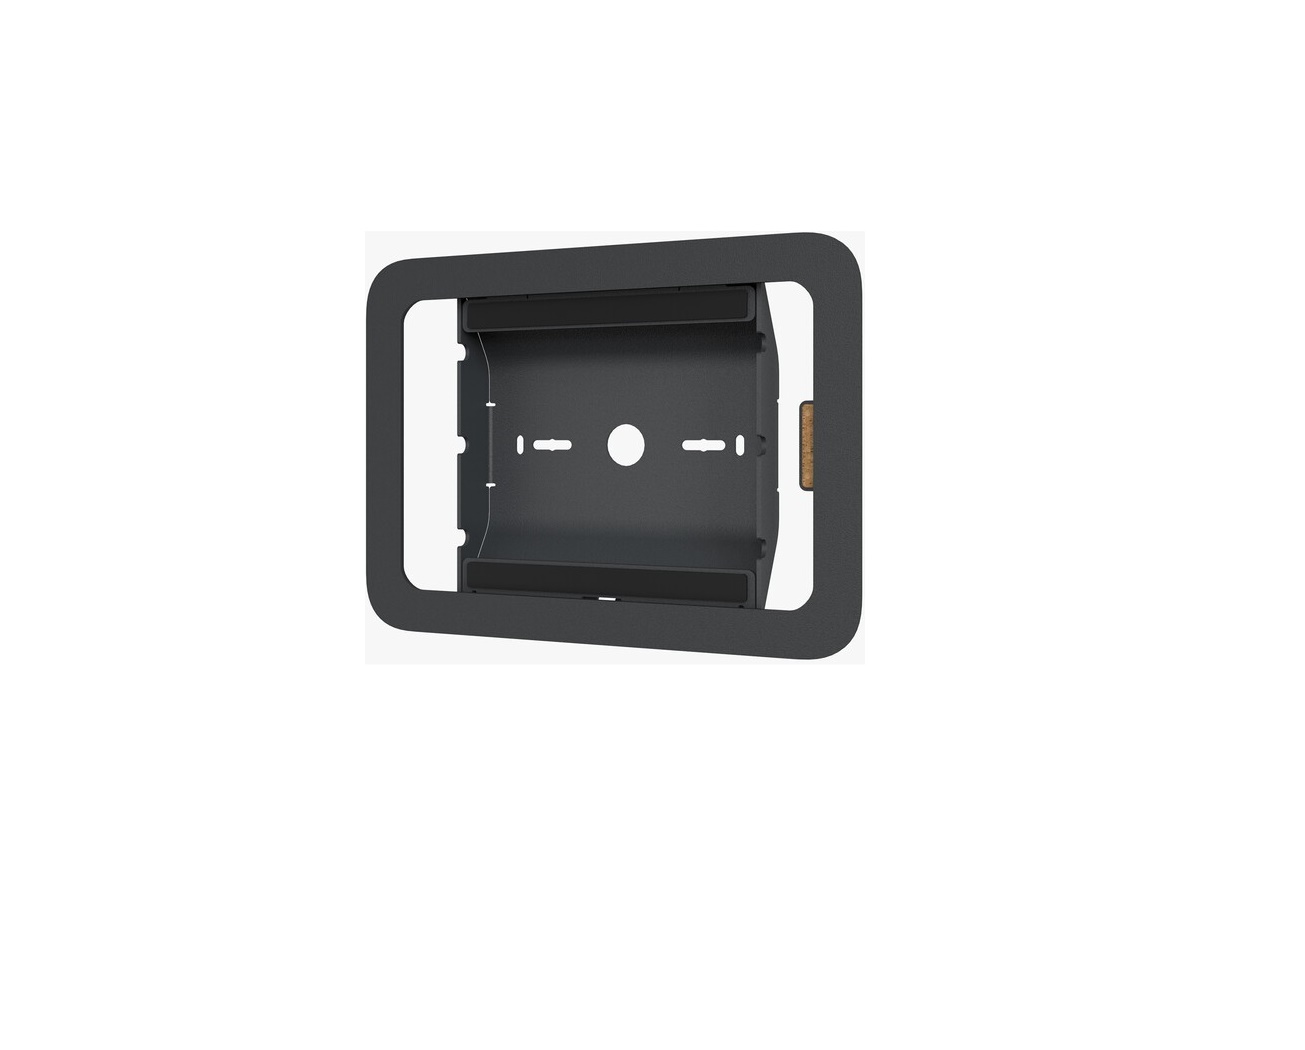 Heckler On-Wall Mount For iPad Mini 6th Generation H658-BG